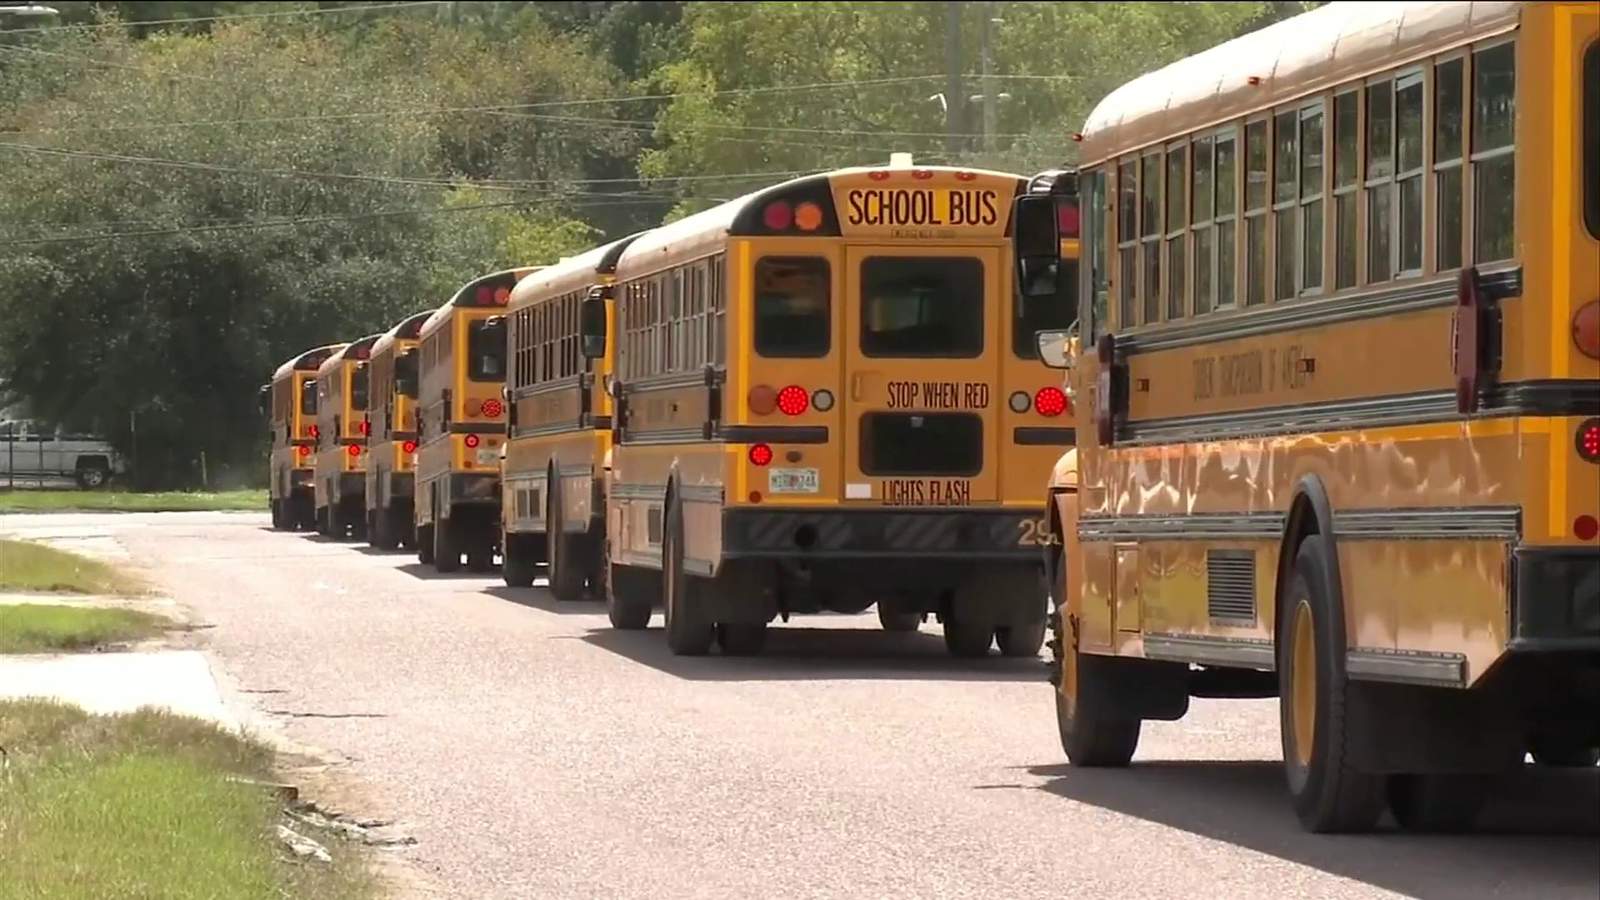 A growing concern over school buses and social distancing in Duval County